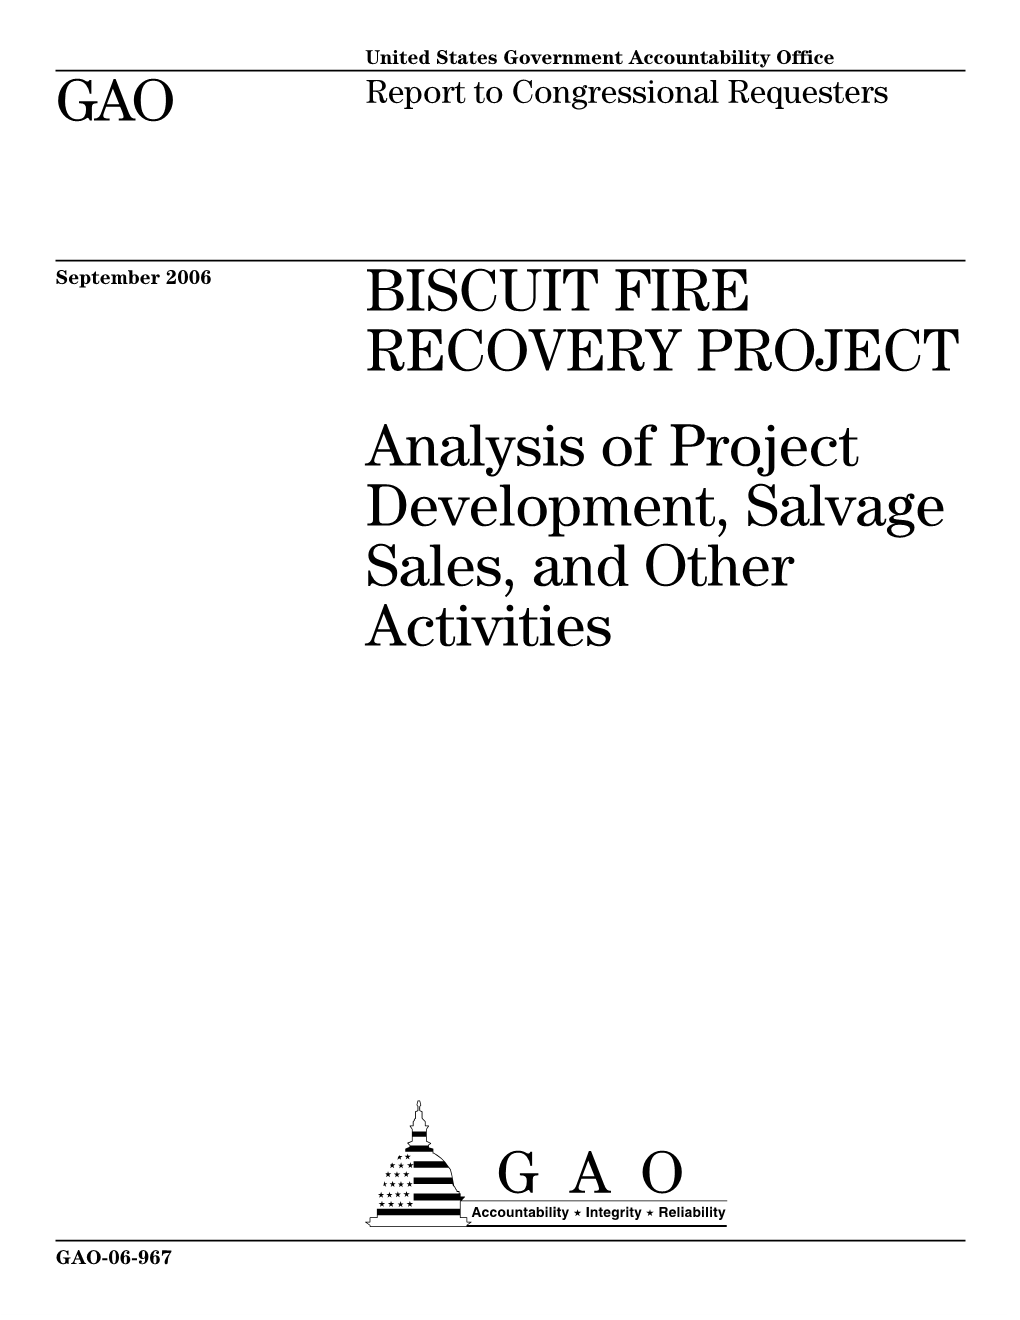 GAO-06-967 Biscuit Fire Recovery Project